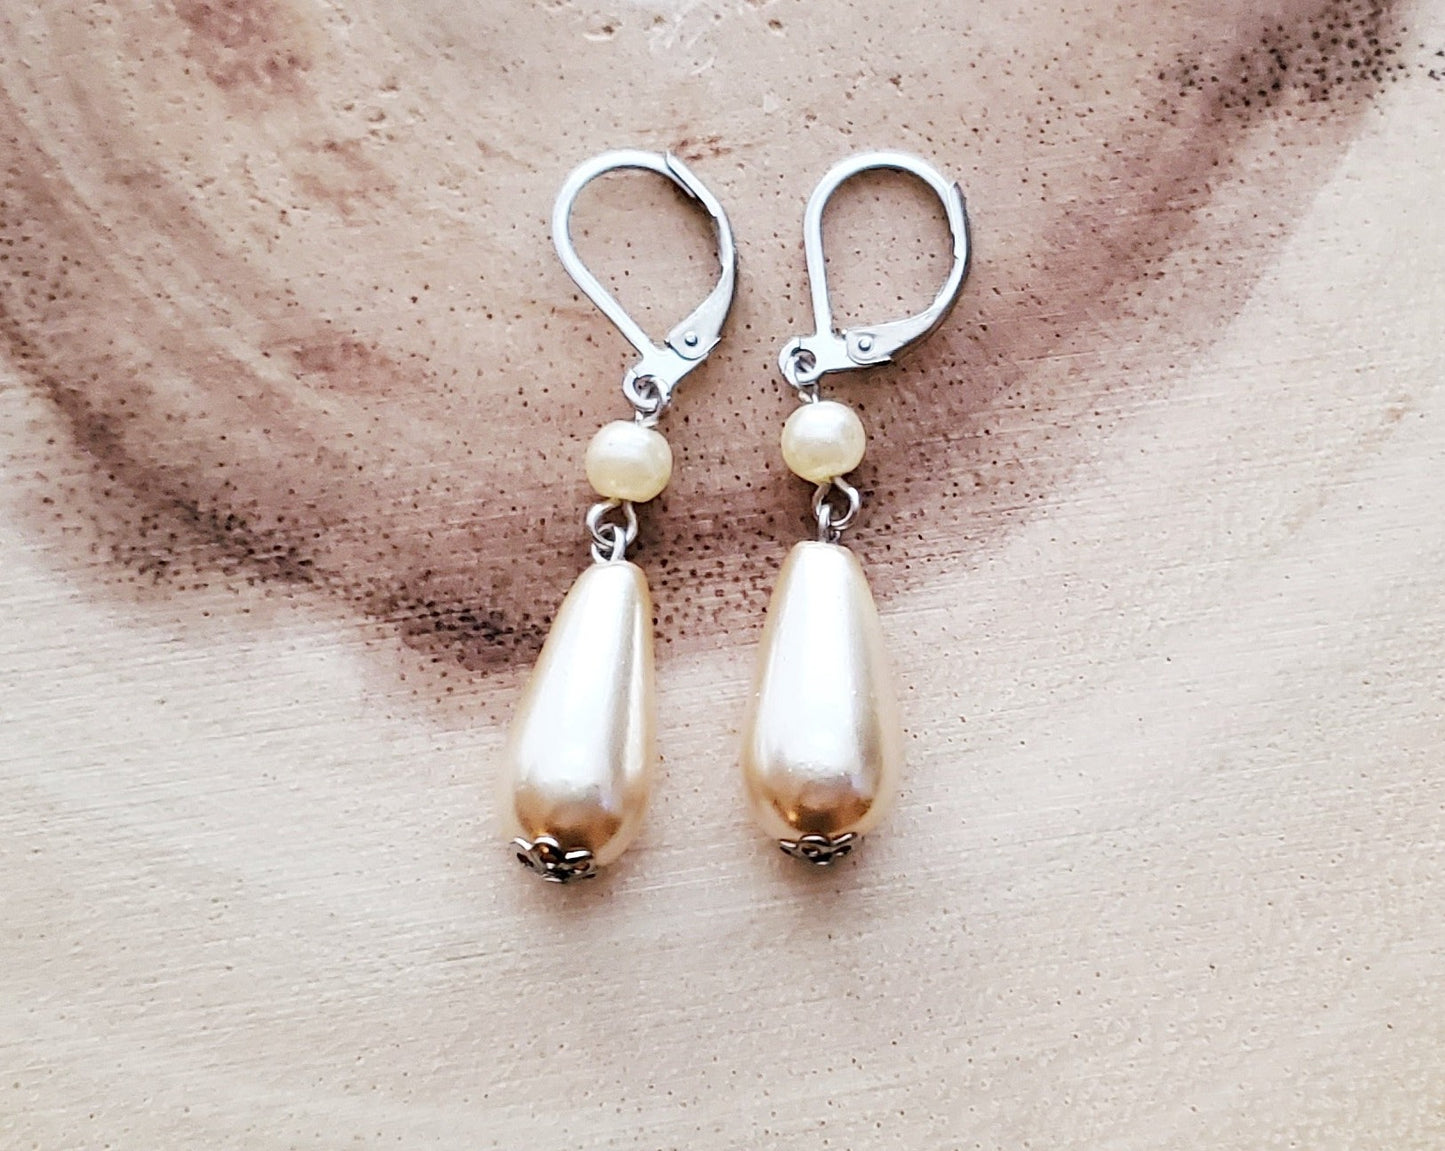 Long Pearl Drop Earrings made with European Faux Pearls and solid Stainless Steel